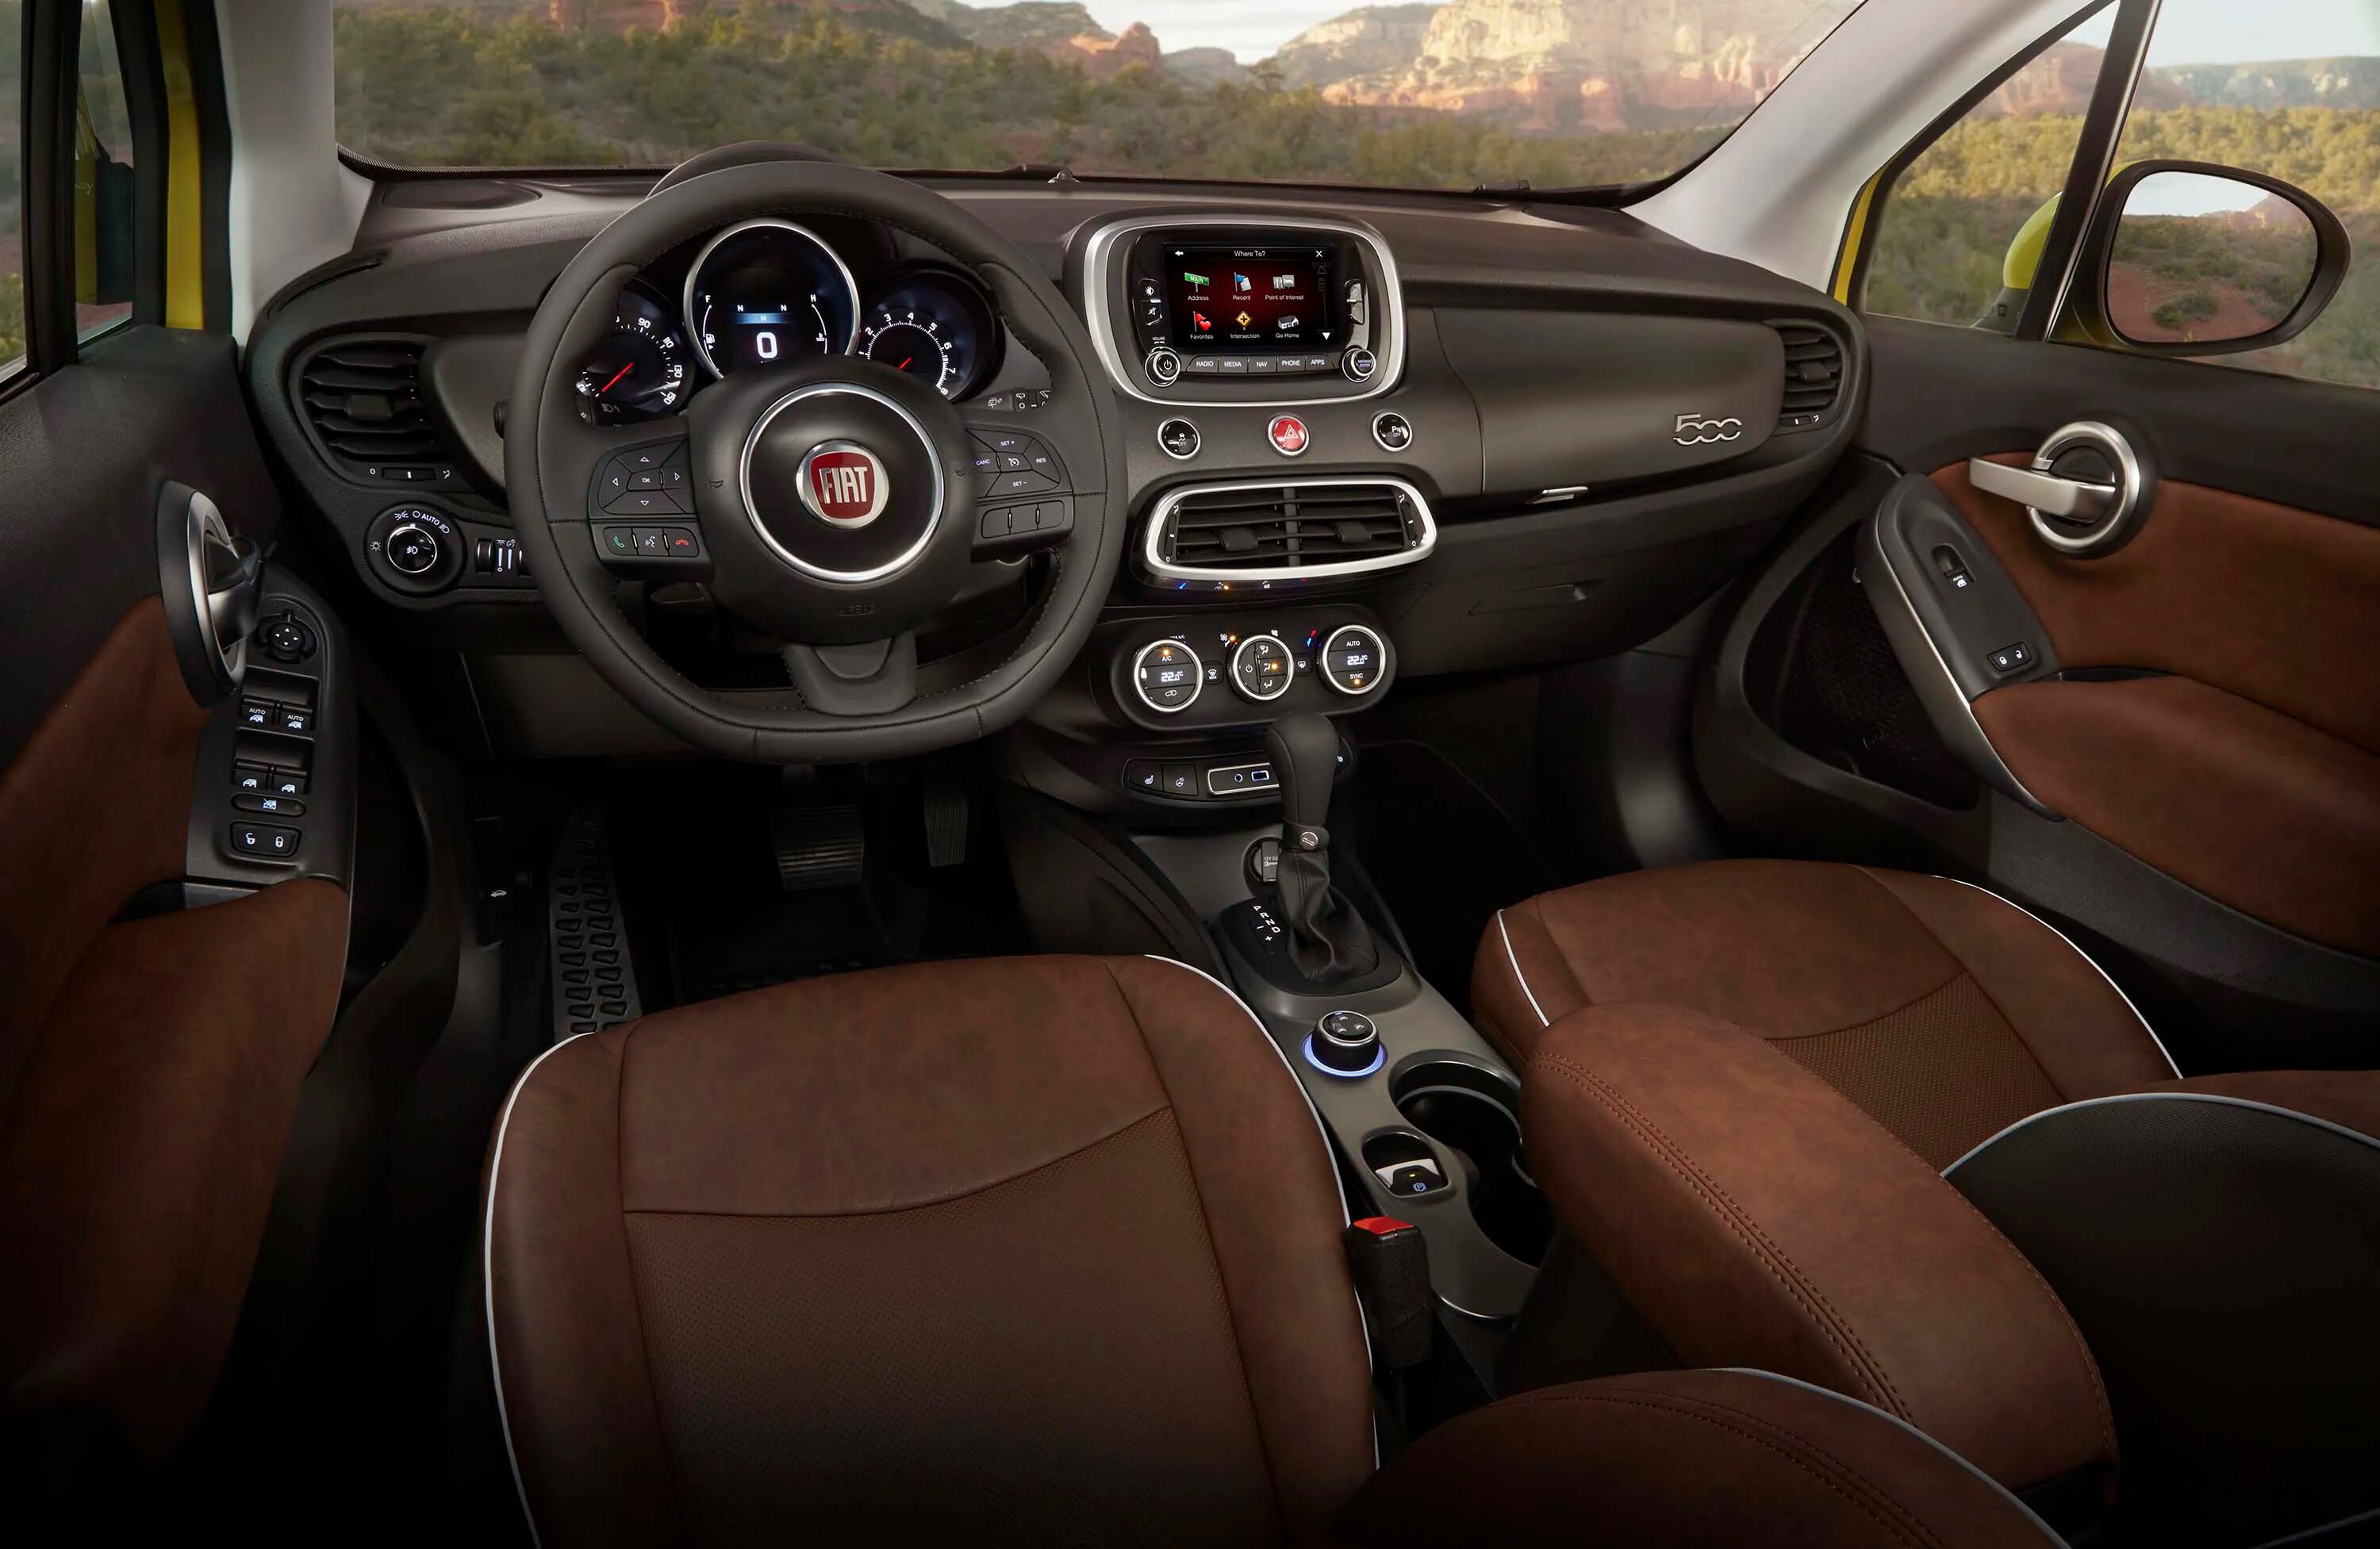 2019 Fiat 500X Unveiled With New Turbocharged Gasoline Engines